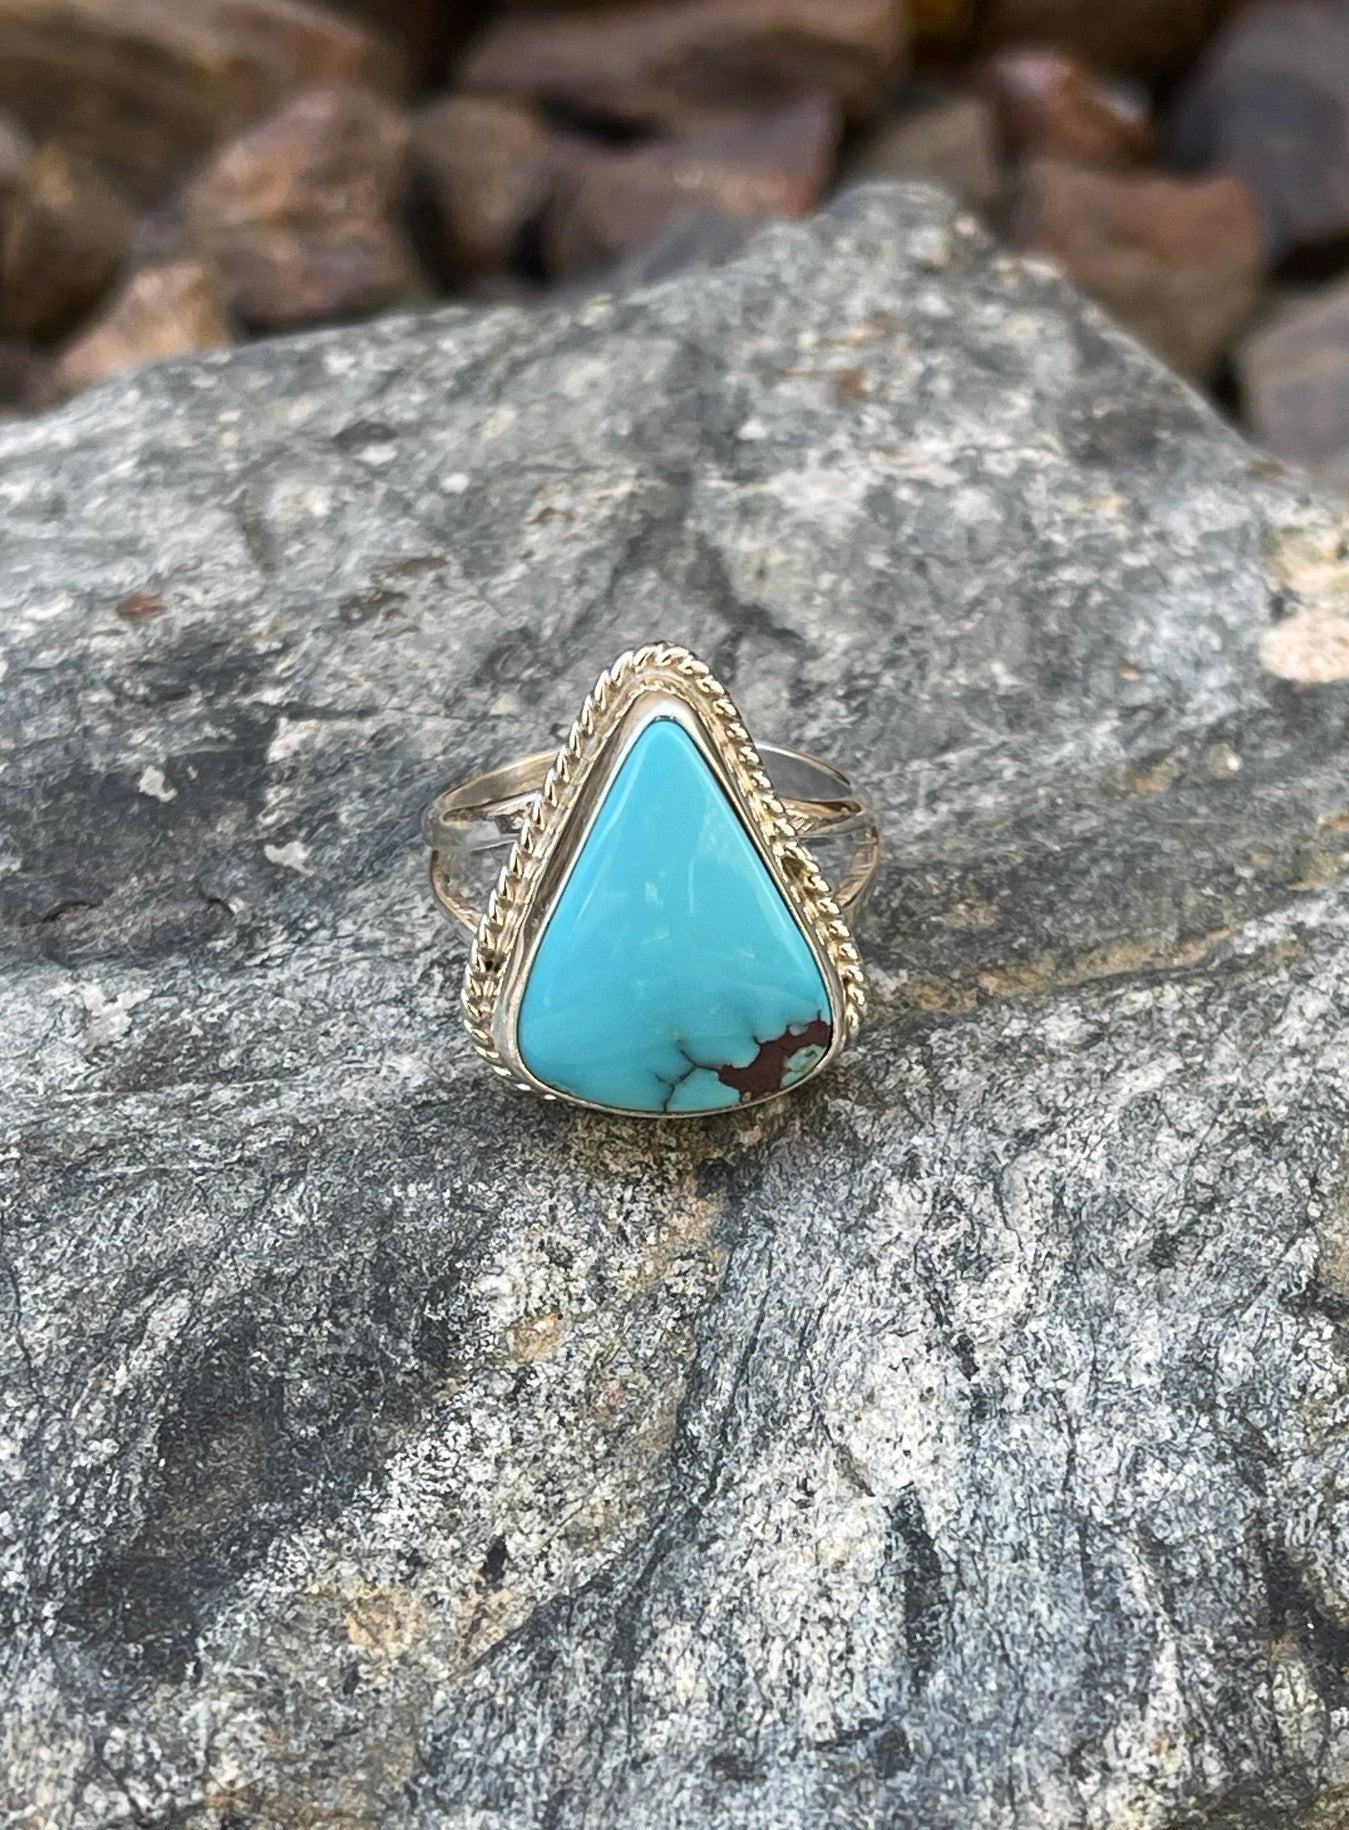 Handmade Sterling Silver Kingman Turquoise Ring with Twist Trim - Size 8 1/2